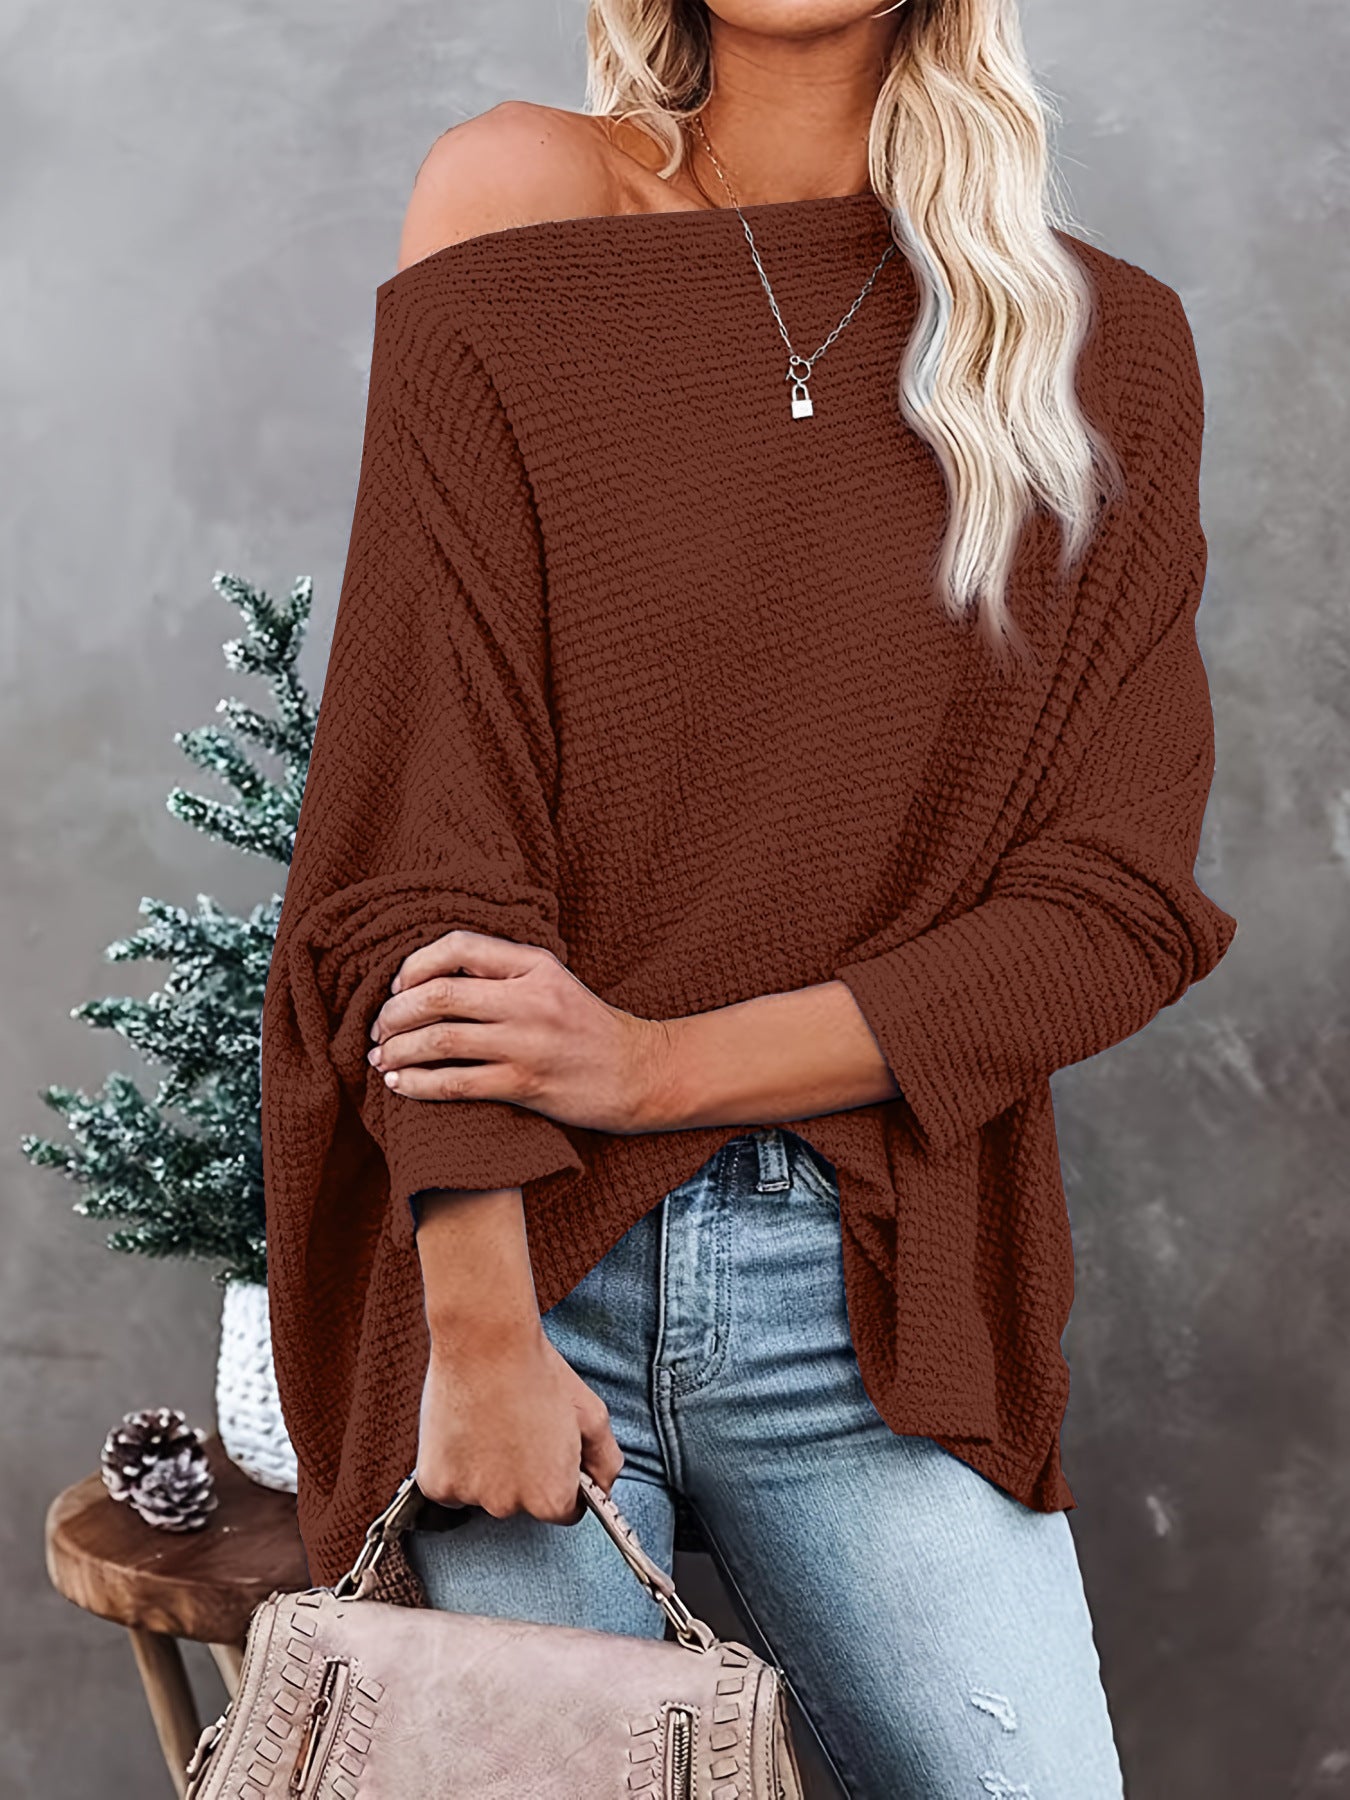 Casual Women Knitted Tops